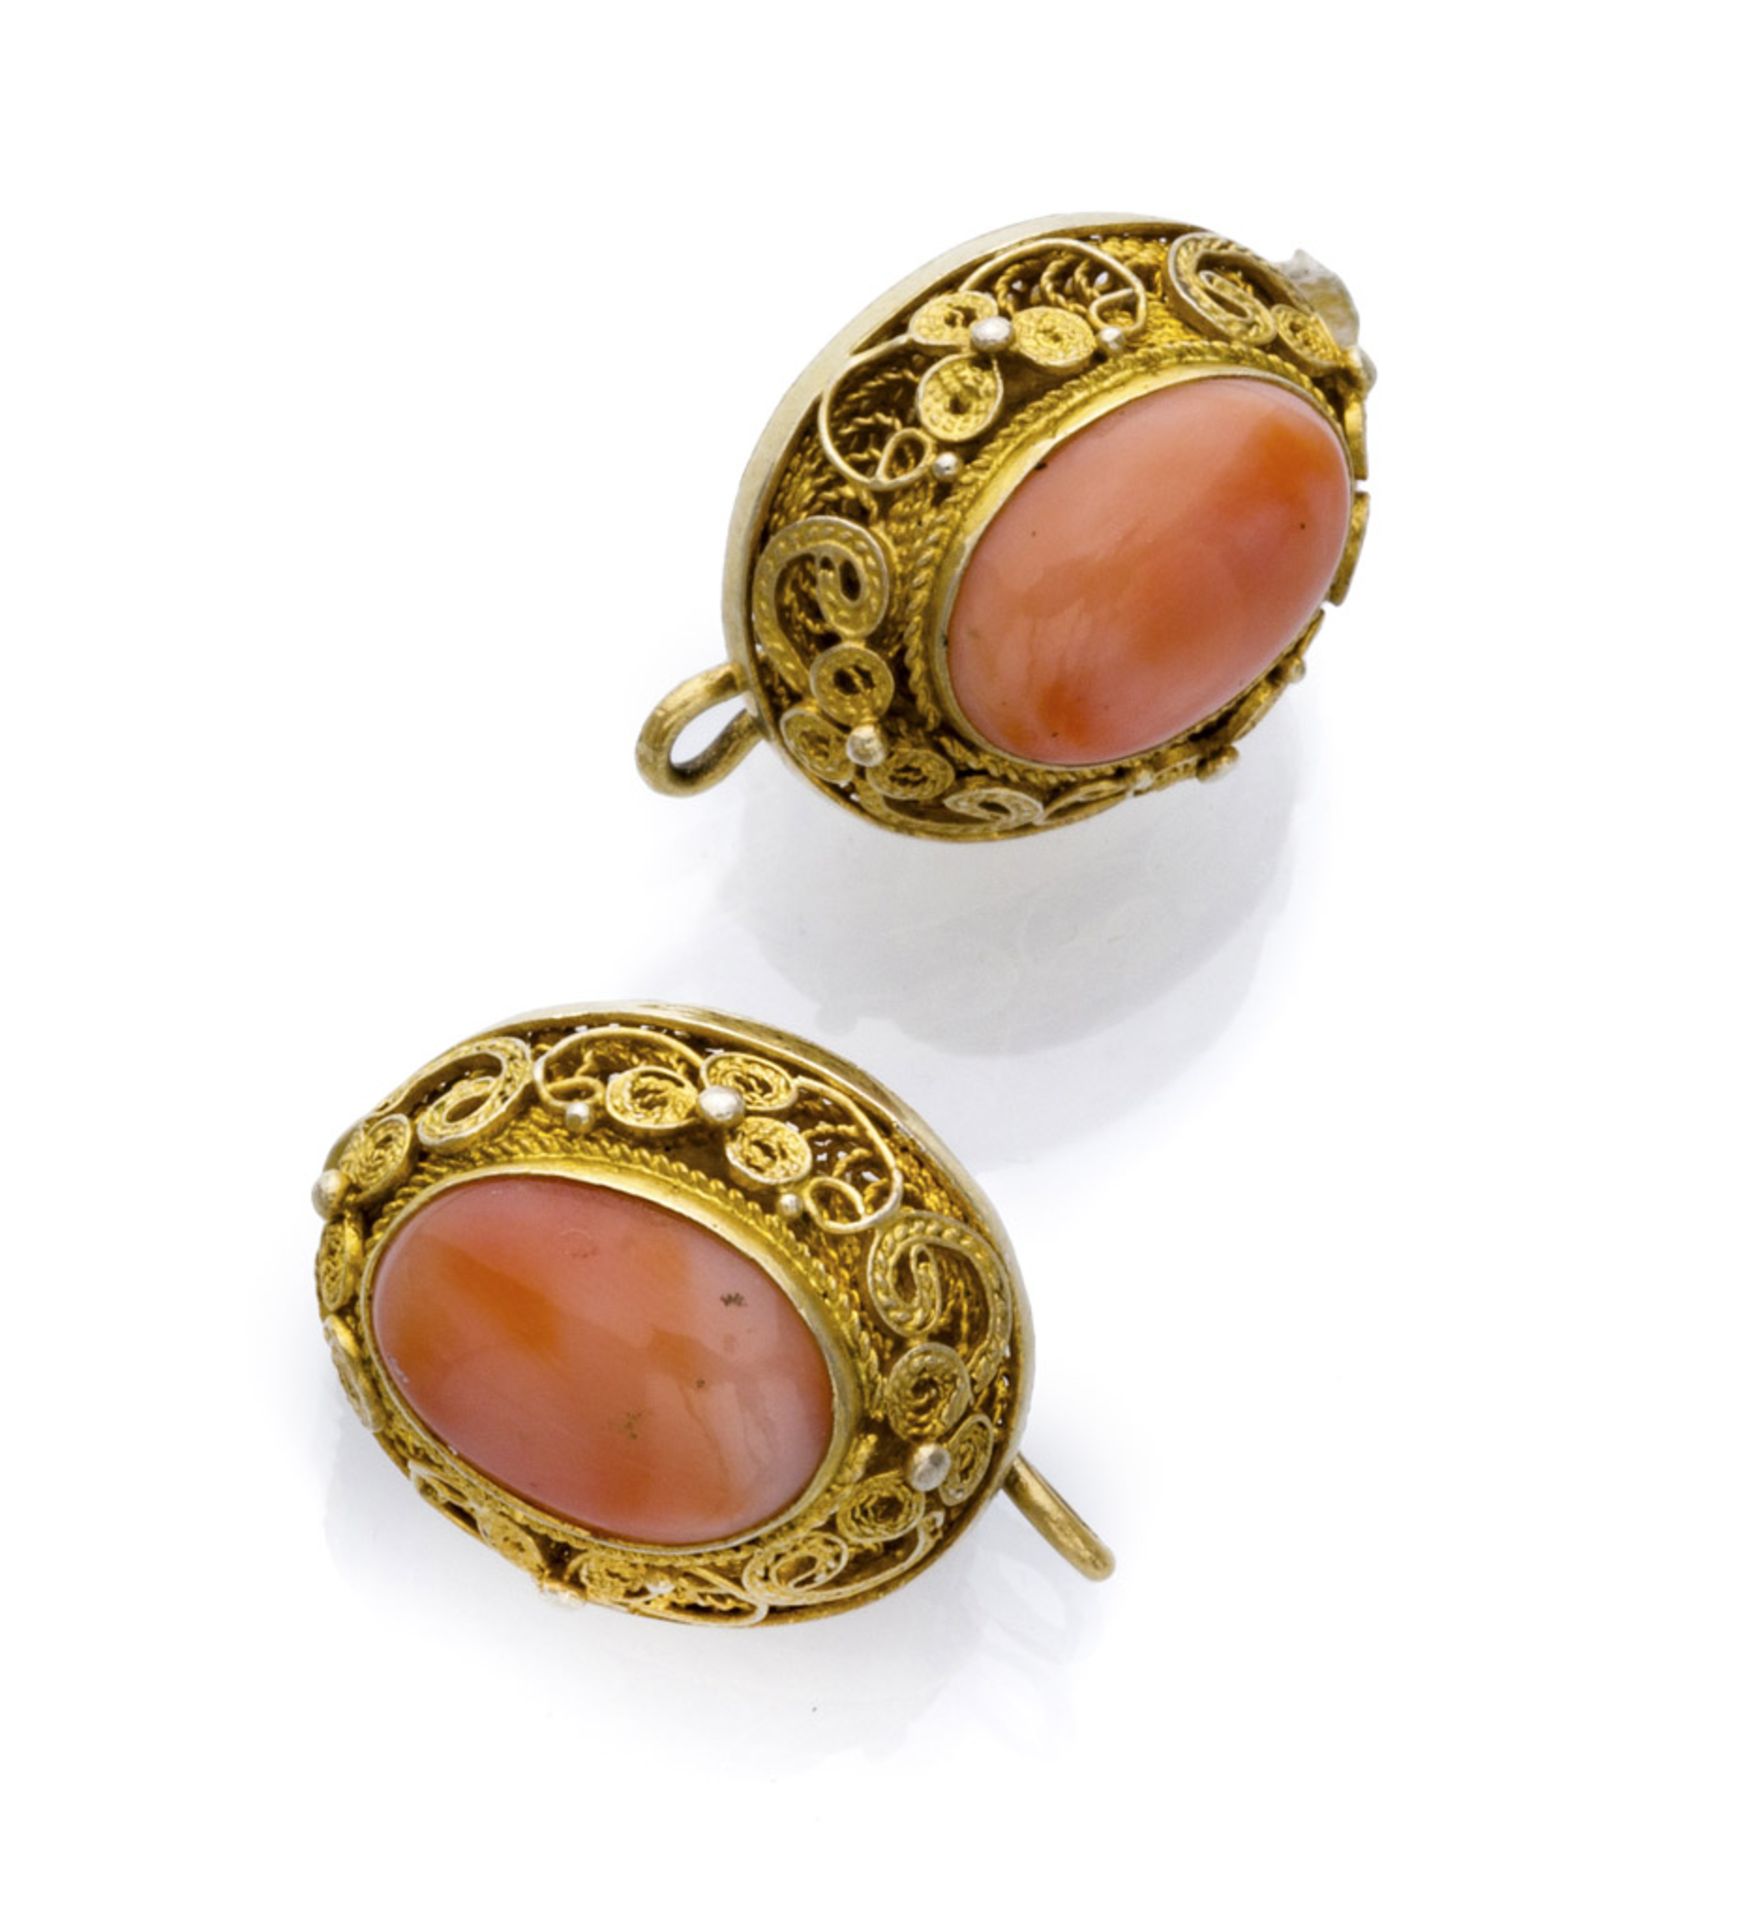 A PAIR OF EARRINGS in gilded metal, crafted in filigree with central pink acrylic stone. Measures